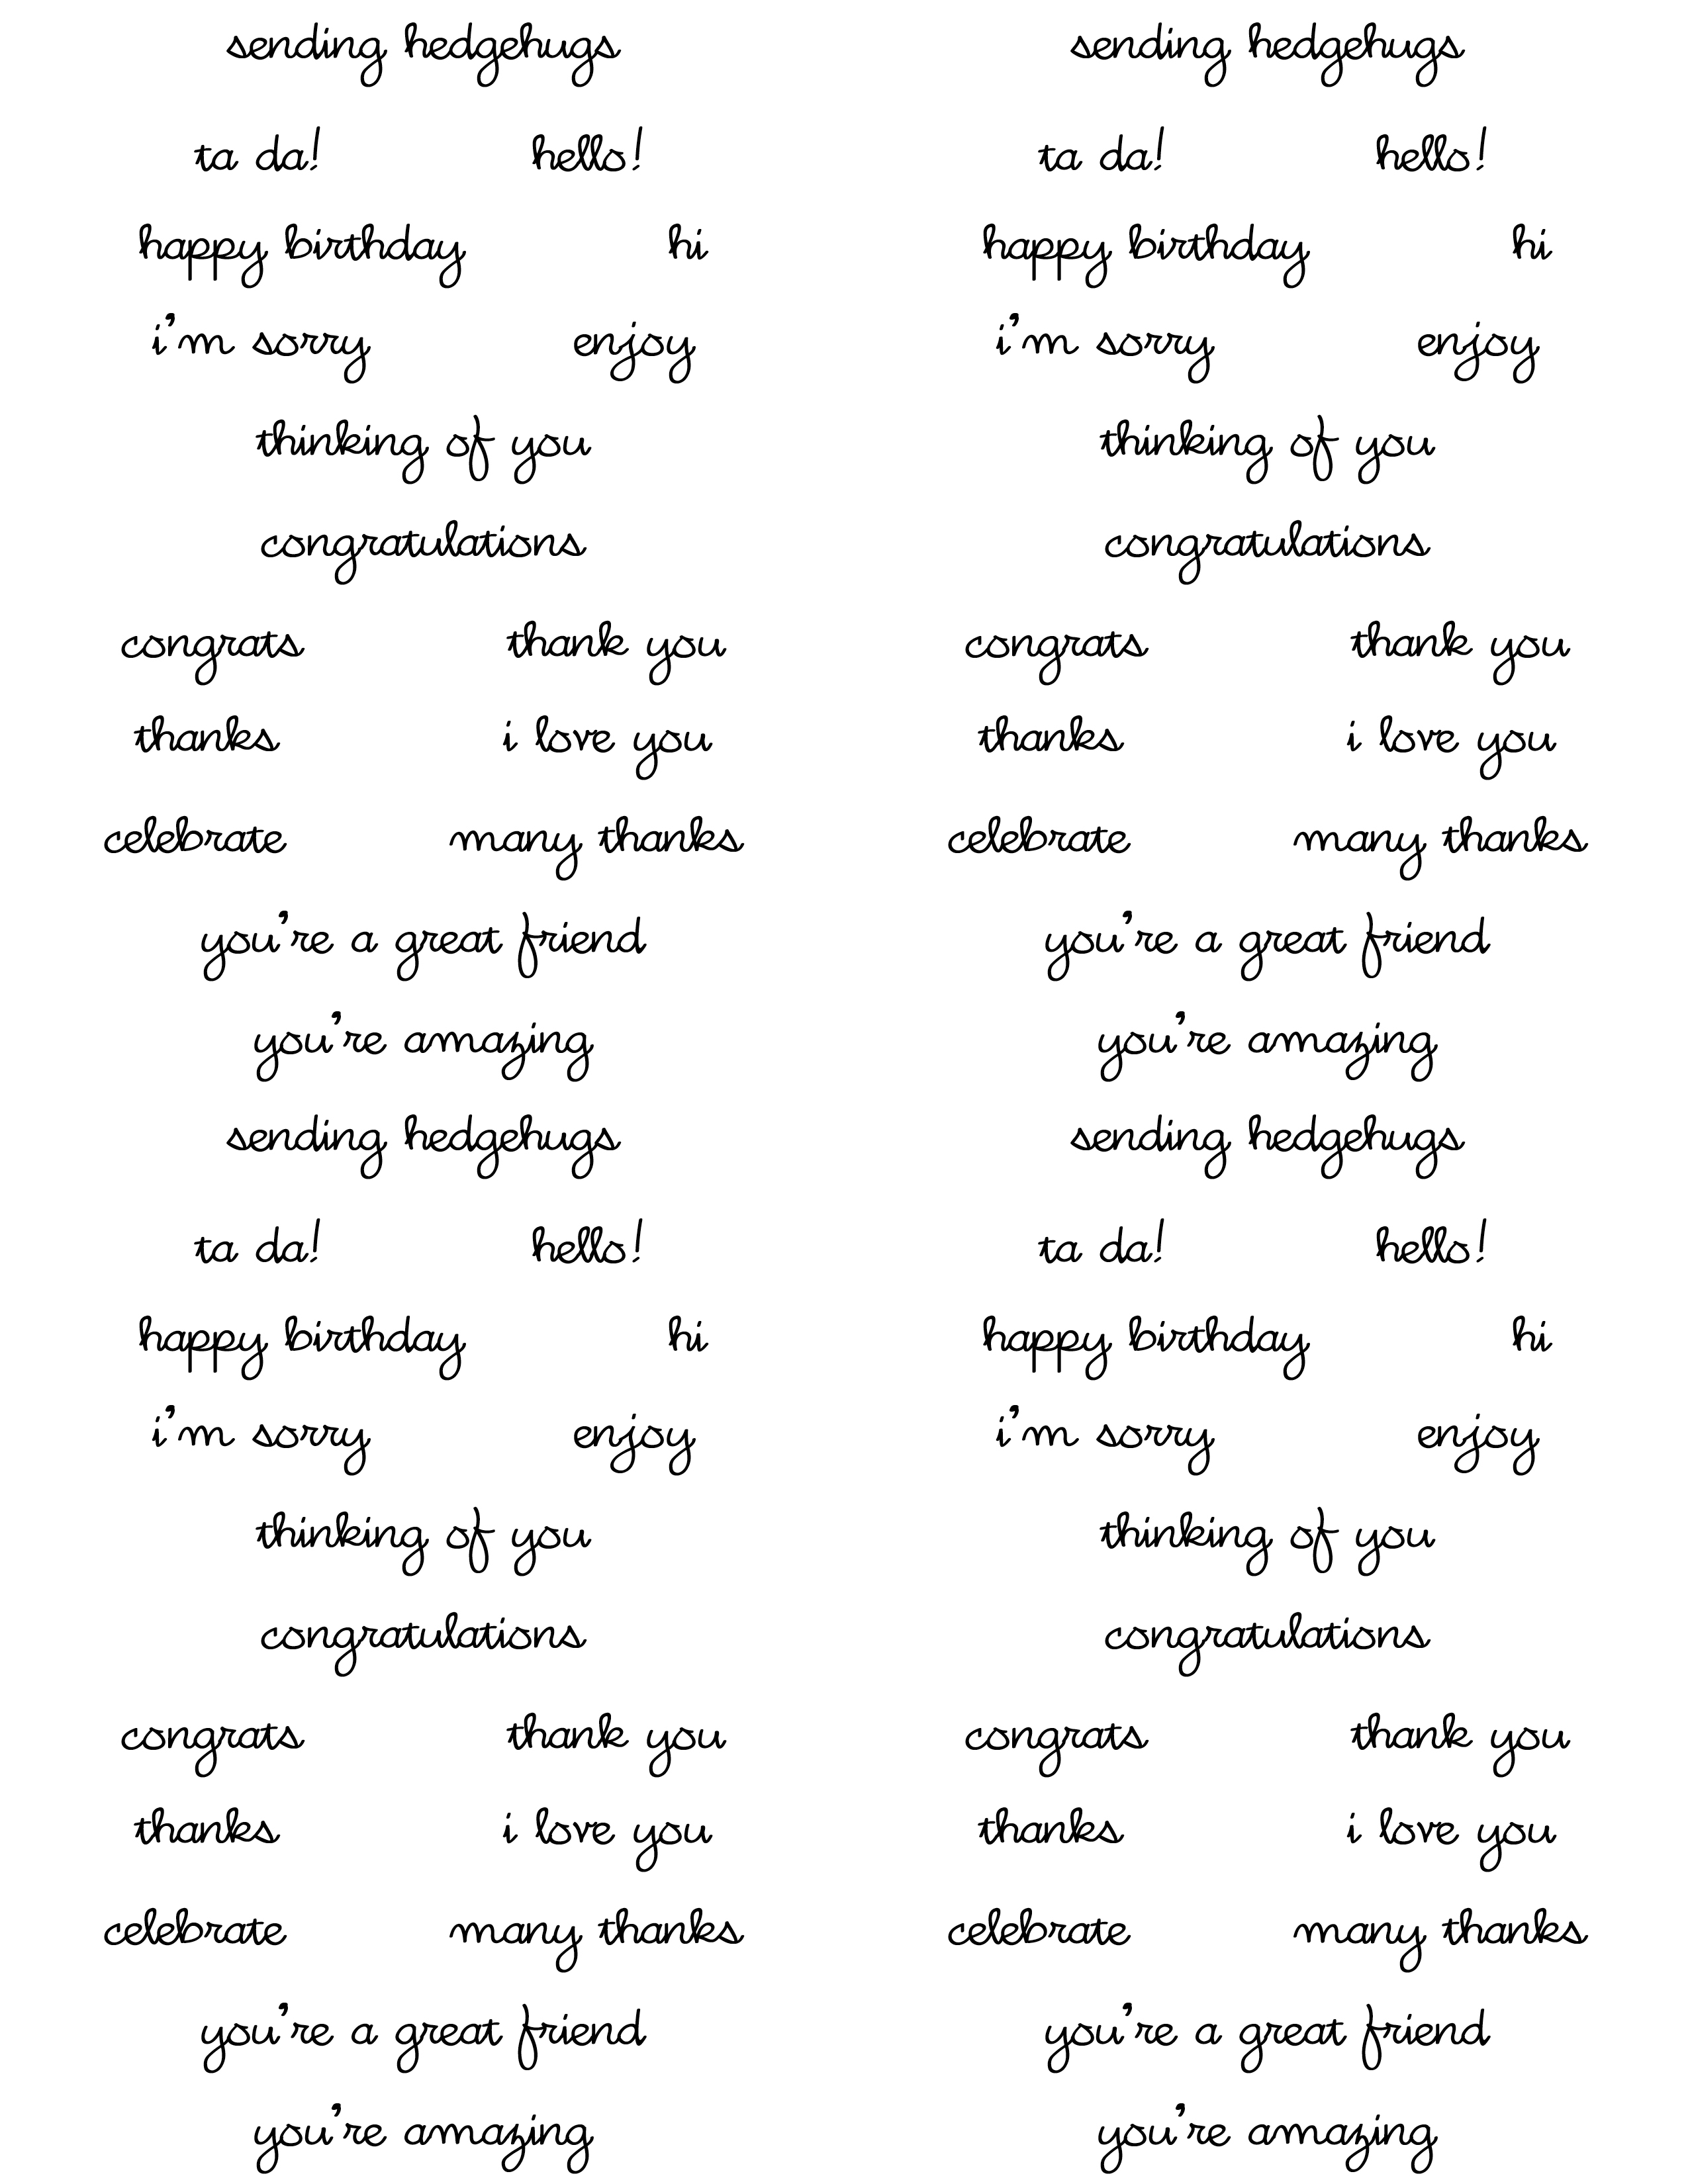 free-printable-sentiments-for-handmade-cards